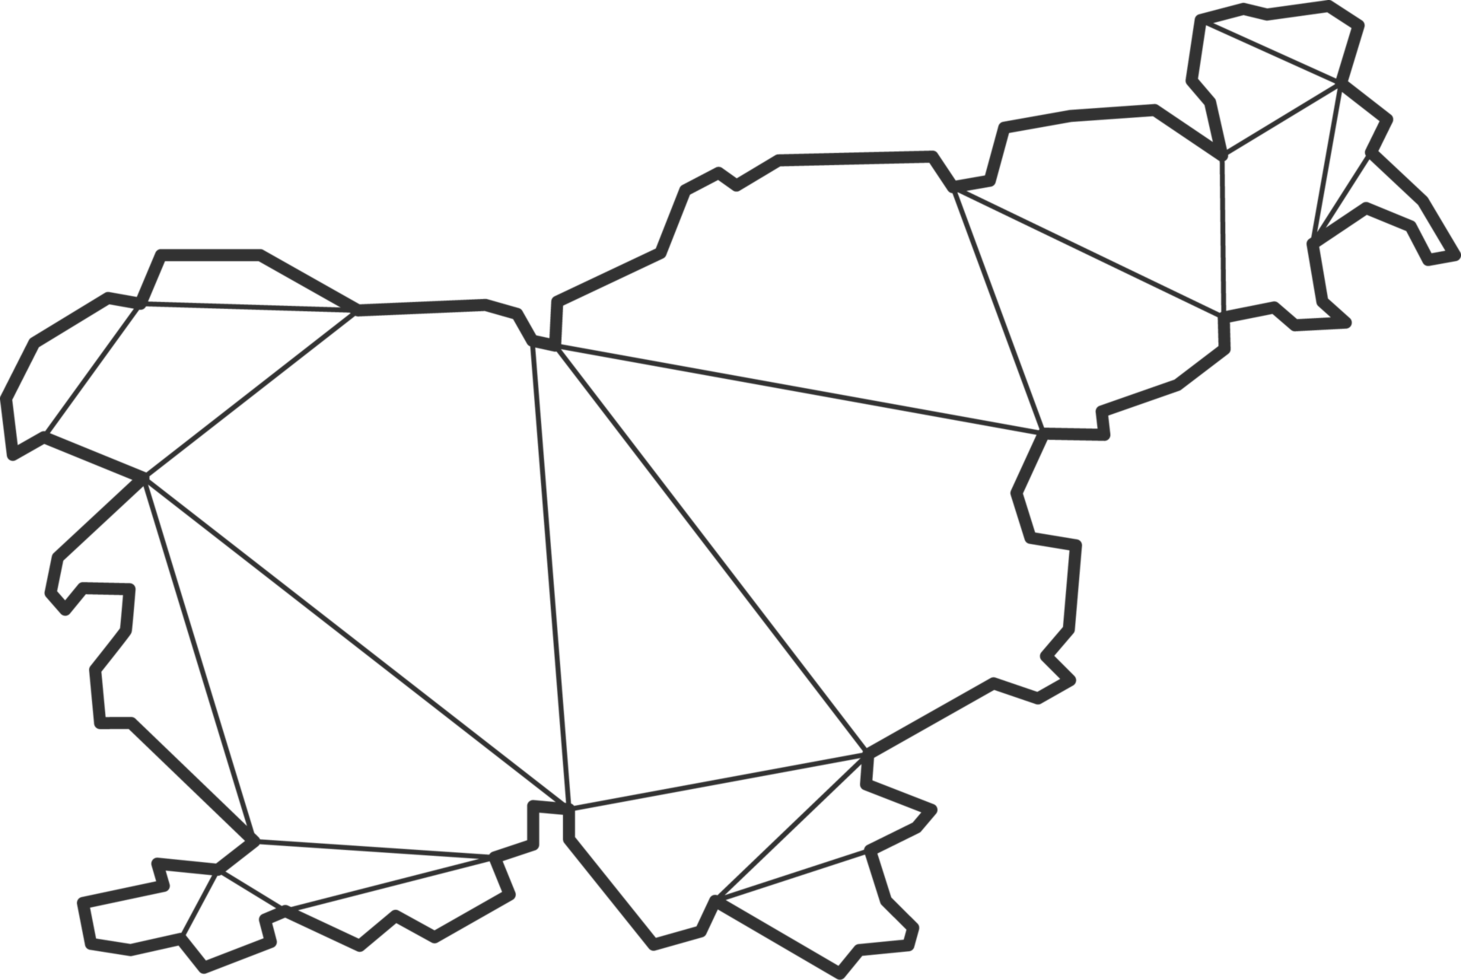 Mosaic triangles map style of Slovenia. png